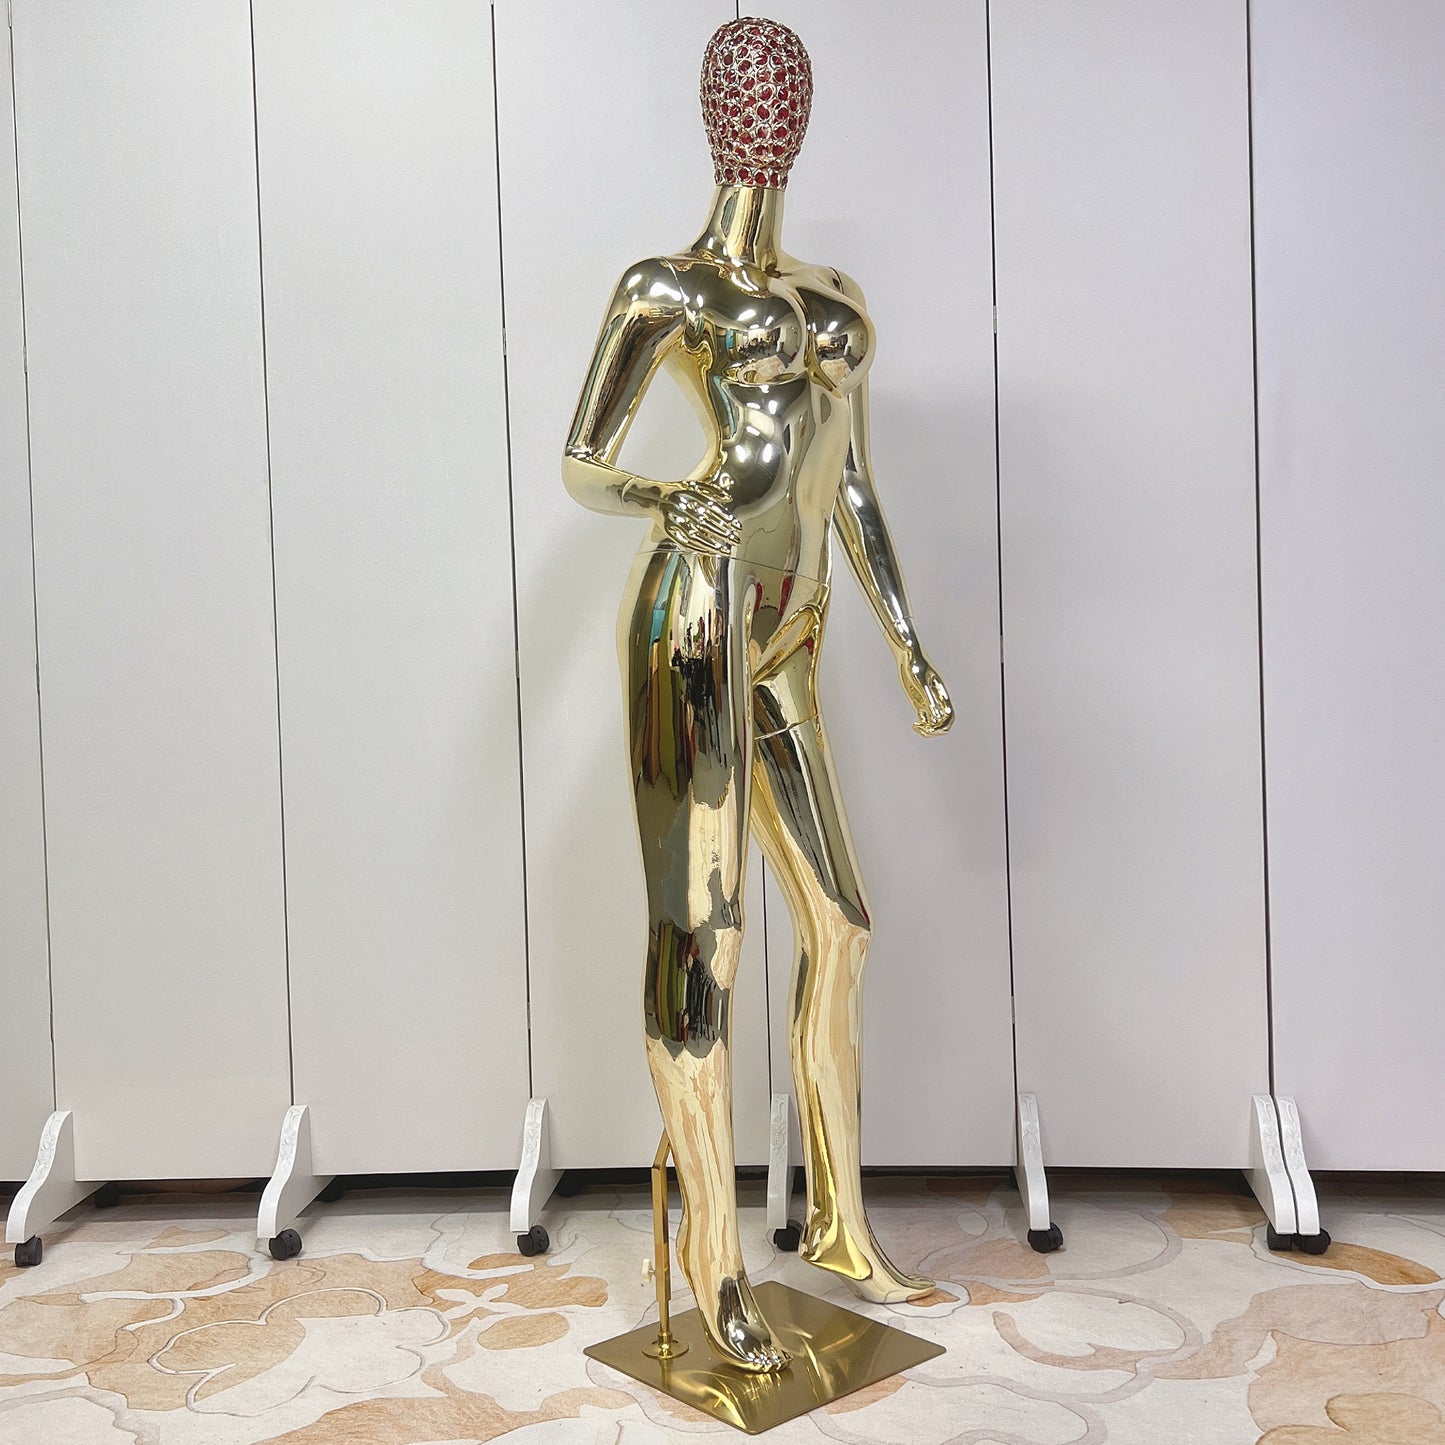 Jelimate Luxury Plated Gold Adult Female Mannequin Full Body Dress Form,Women Dress Form With Wire Mesh Head,Wedding Dress Mannequin Clothing Display Model